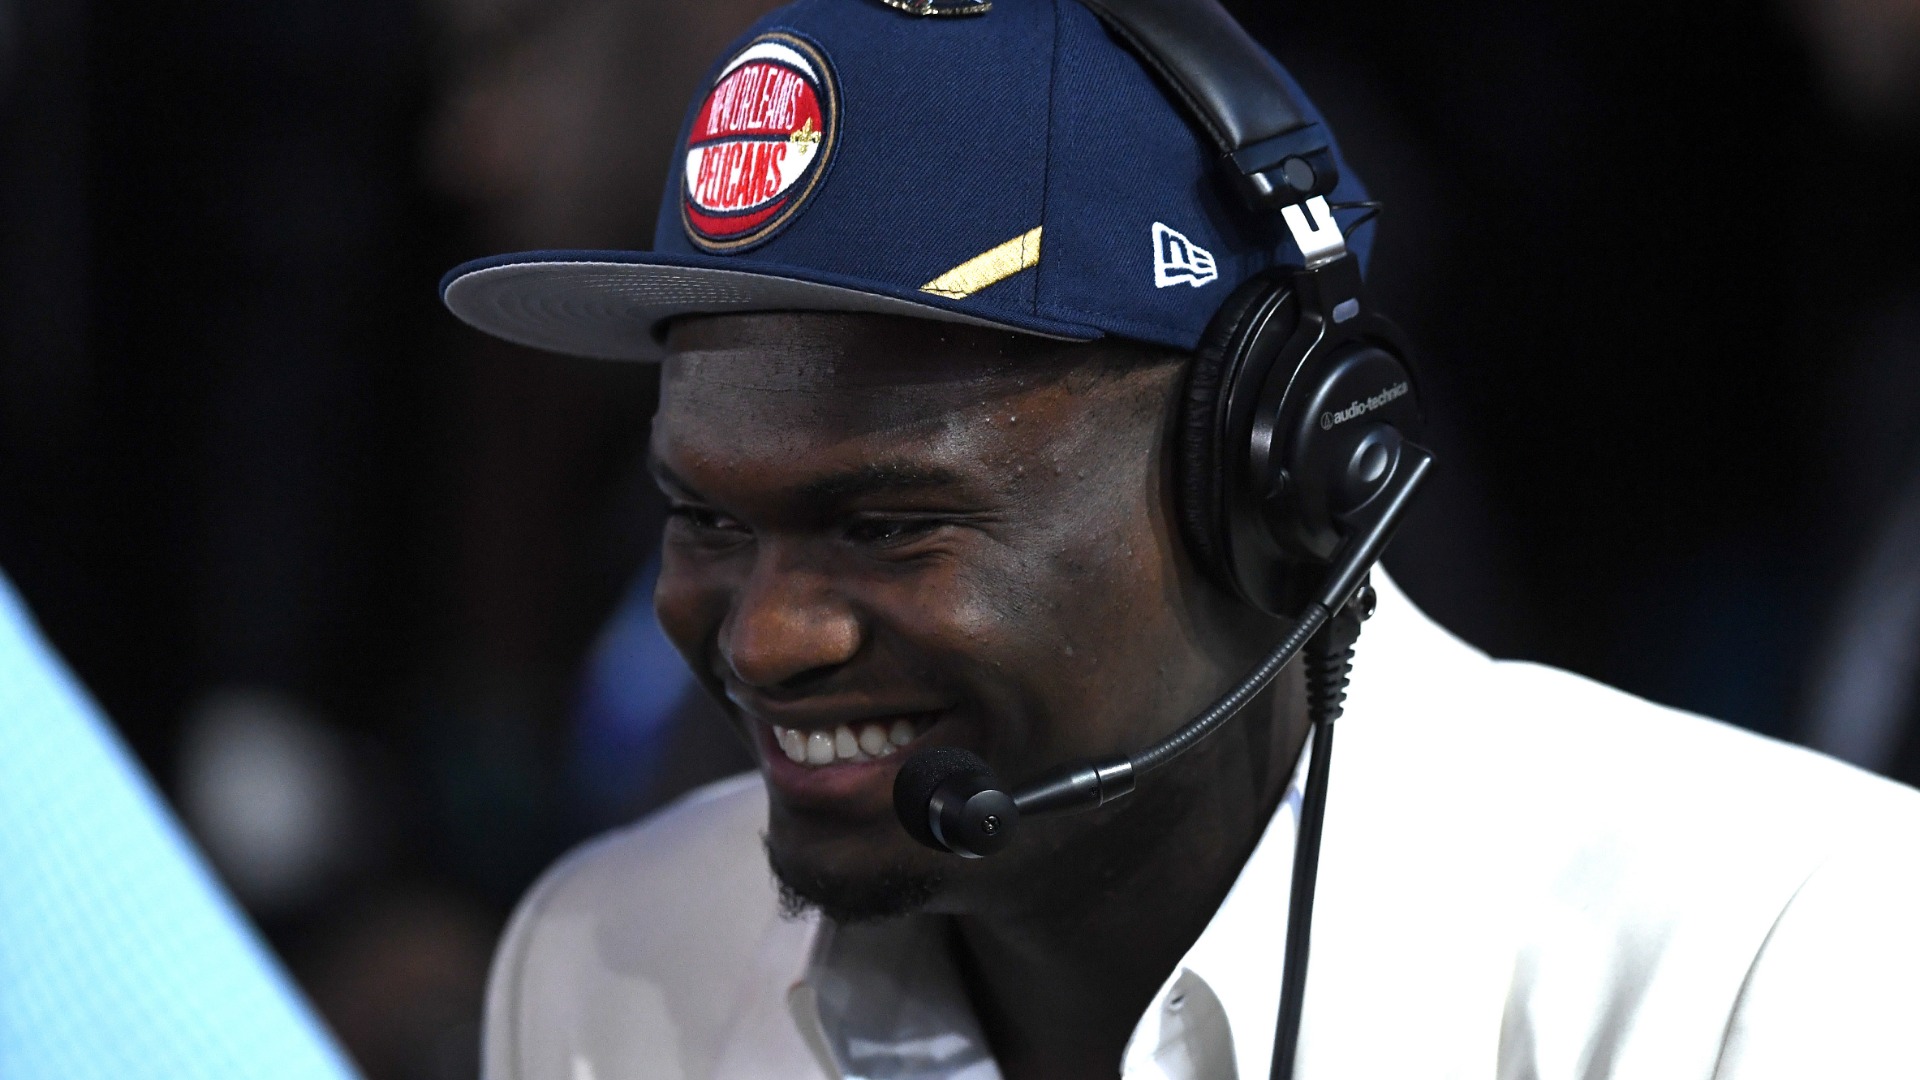 The New Orleans Pelicans consider Zion Williamson in "a population of one", but he will be given time to adapt to the NBA next season.